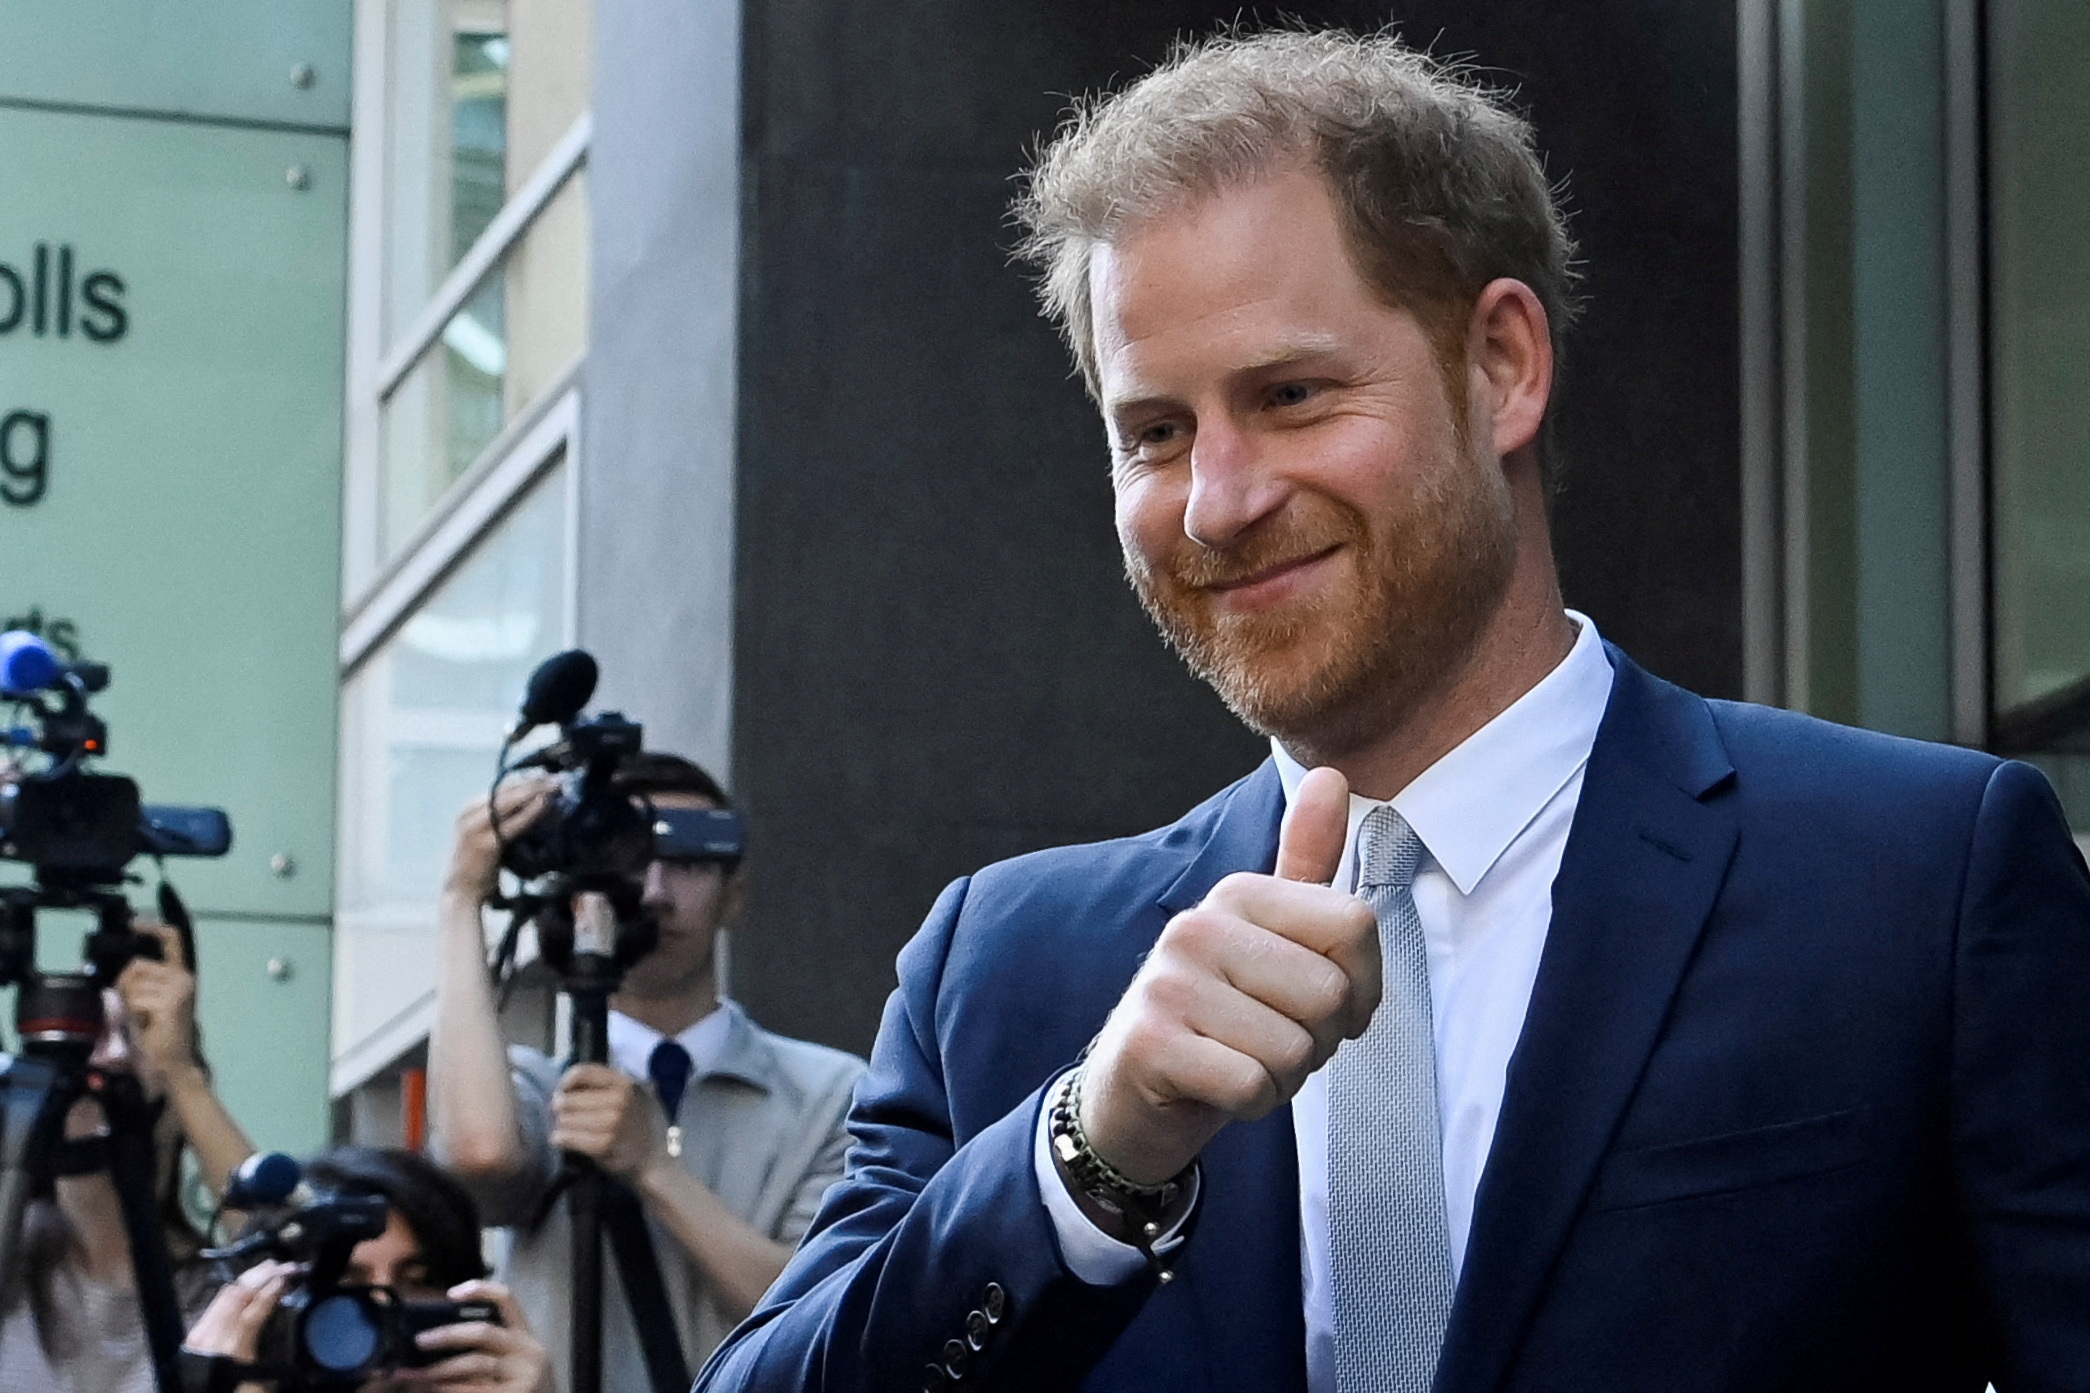 Prince Harry challenges 'unfair treatment' over UK security in London ...